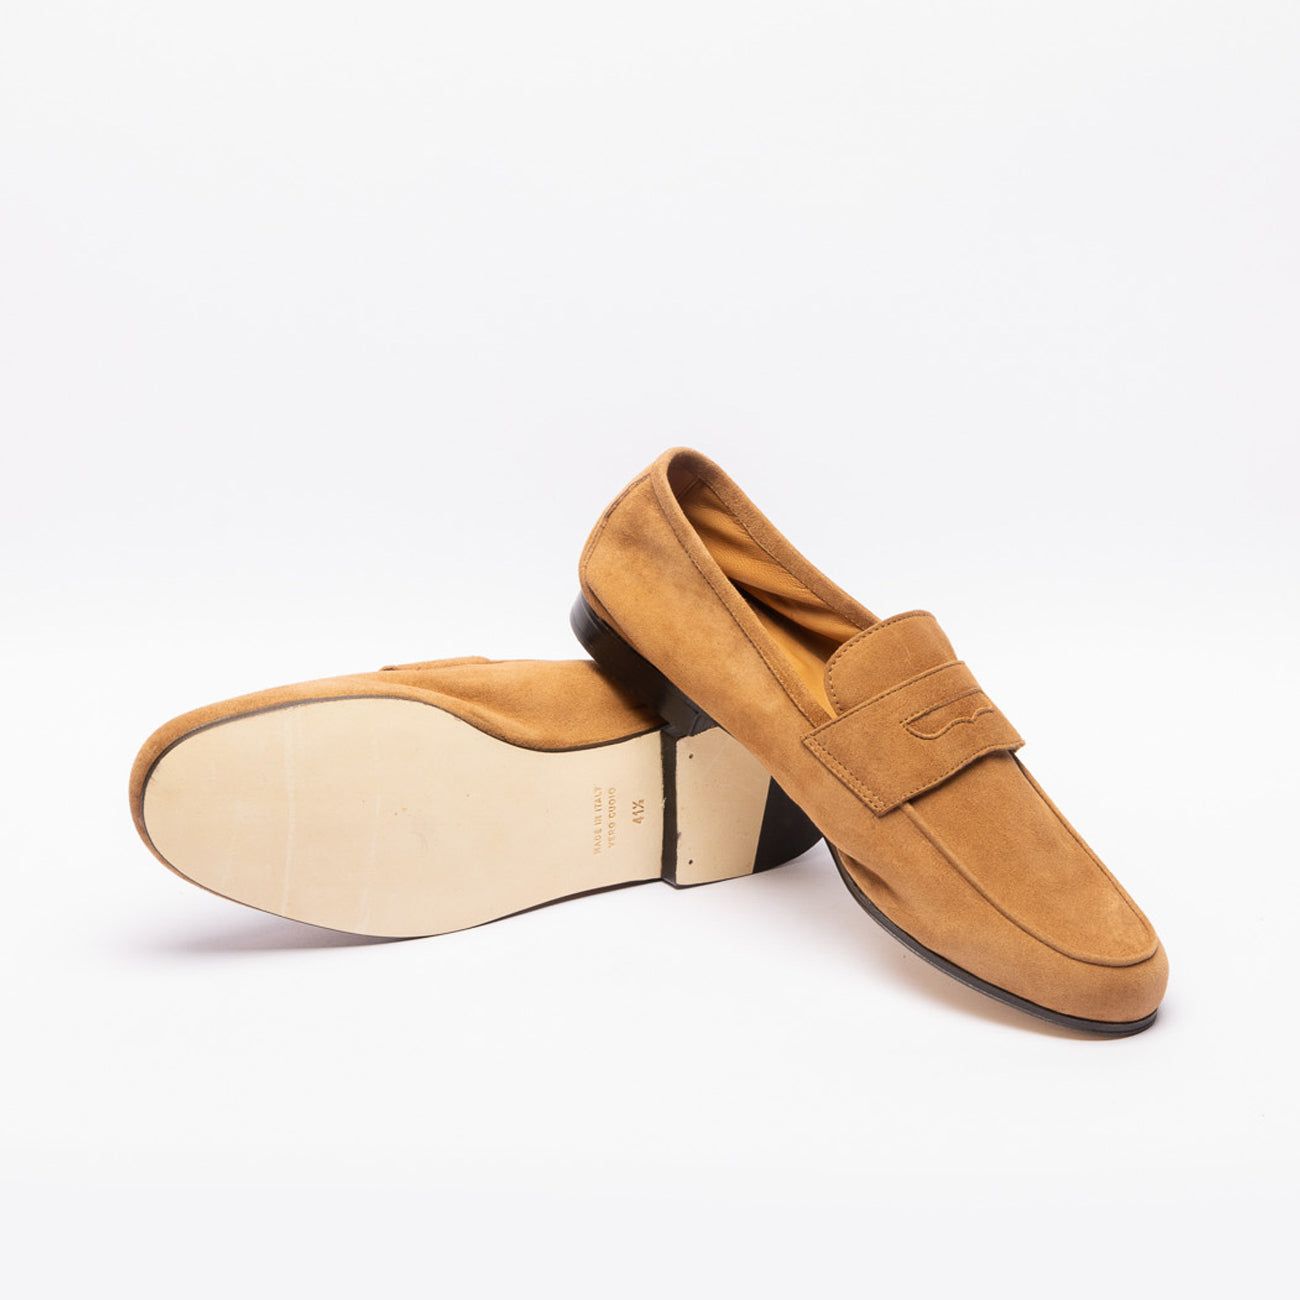 Borghini unlined cognac suede penny loafer